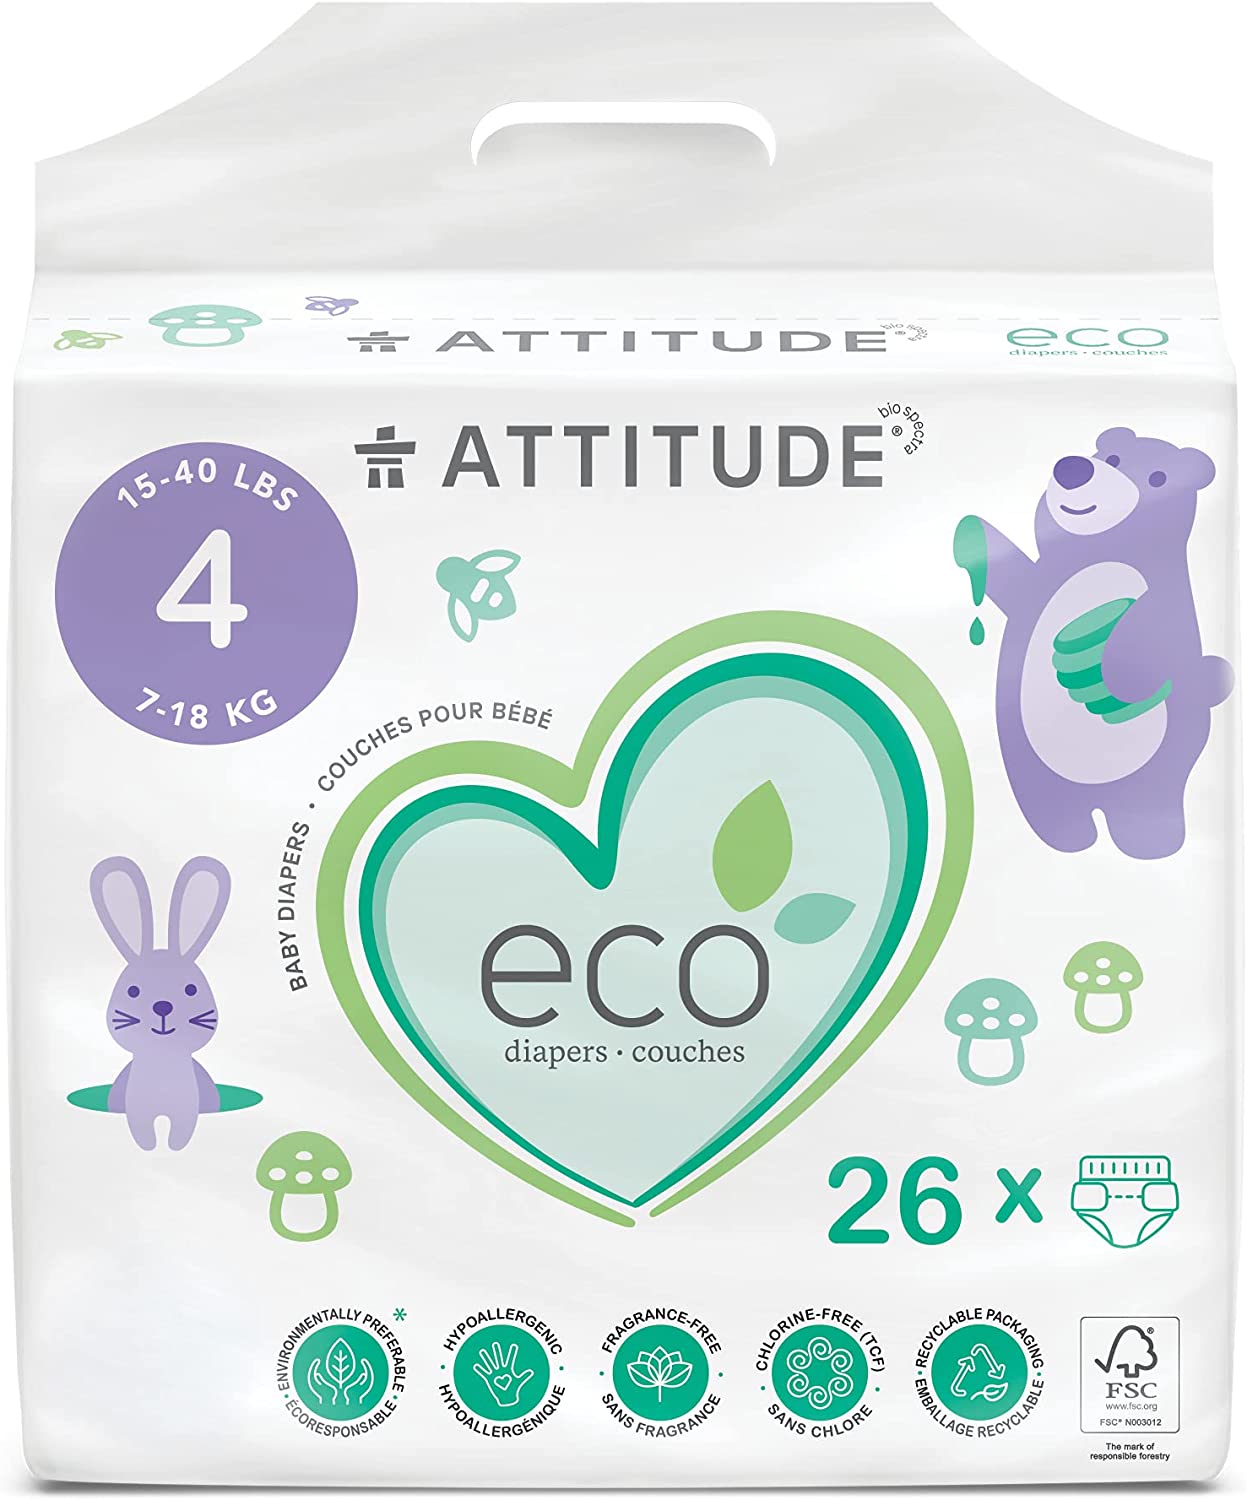 ATTITUDE Eco-Friendly Diapers, Non-Toxic, Hypoallergenic, Safe for Sensitive Skin, Chlorine-Free, Leak-Free & Biodegradable Baby Diapers, Plain White (Unprinted), Size 4 (15-40 lbs), 26 Count (16240)